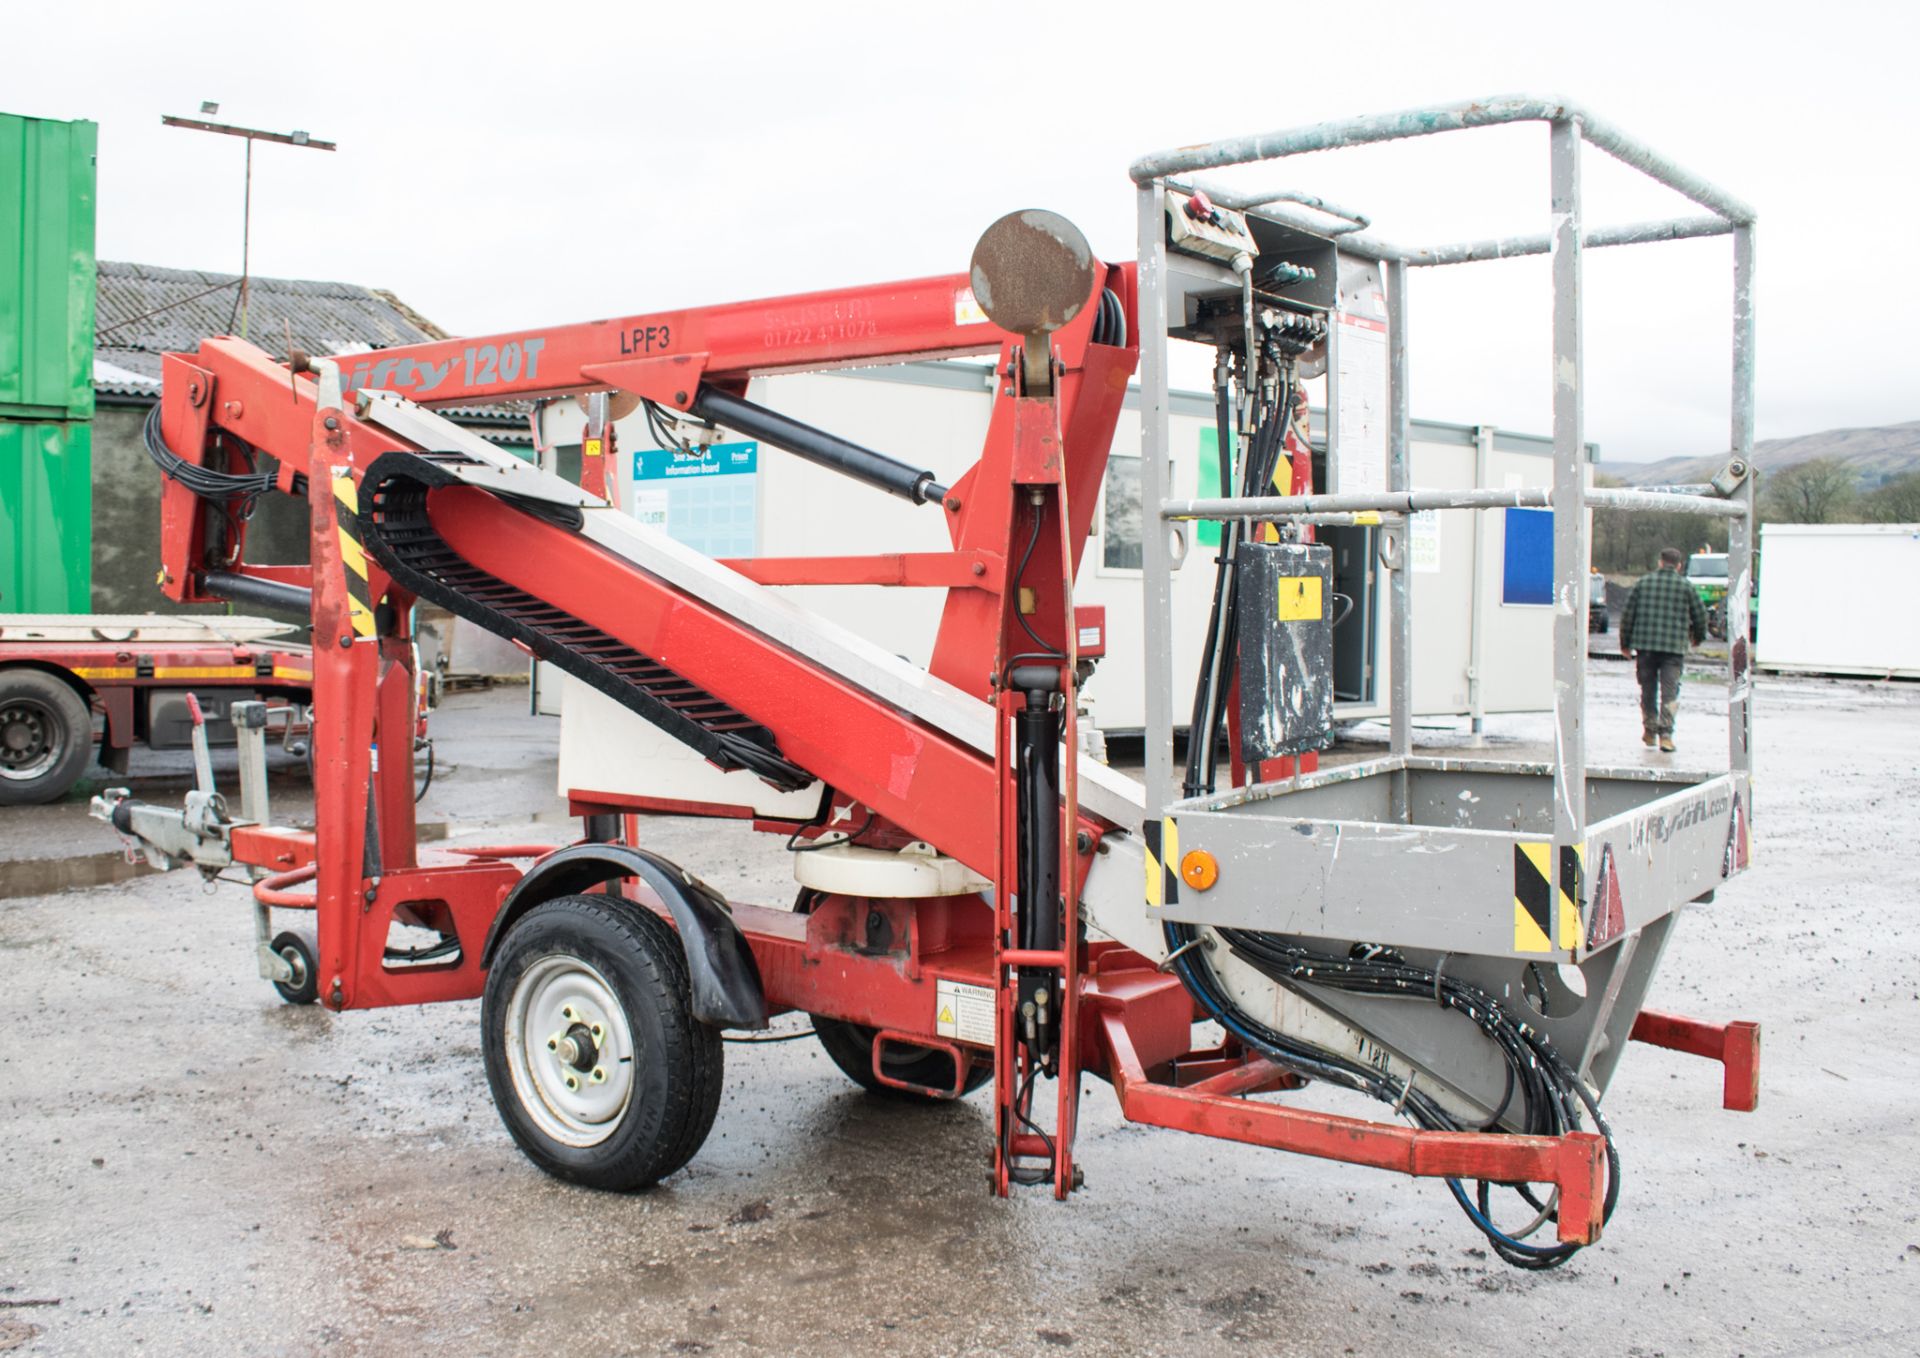 Nifty 120 TE fast tow articulated boom lift access platform Year: 2005 S/N: 0413653 WOOLPF3 - Image 3 of 9